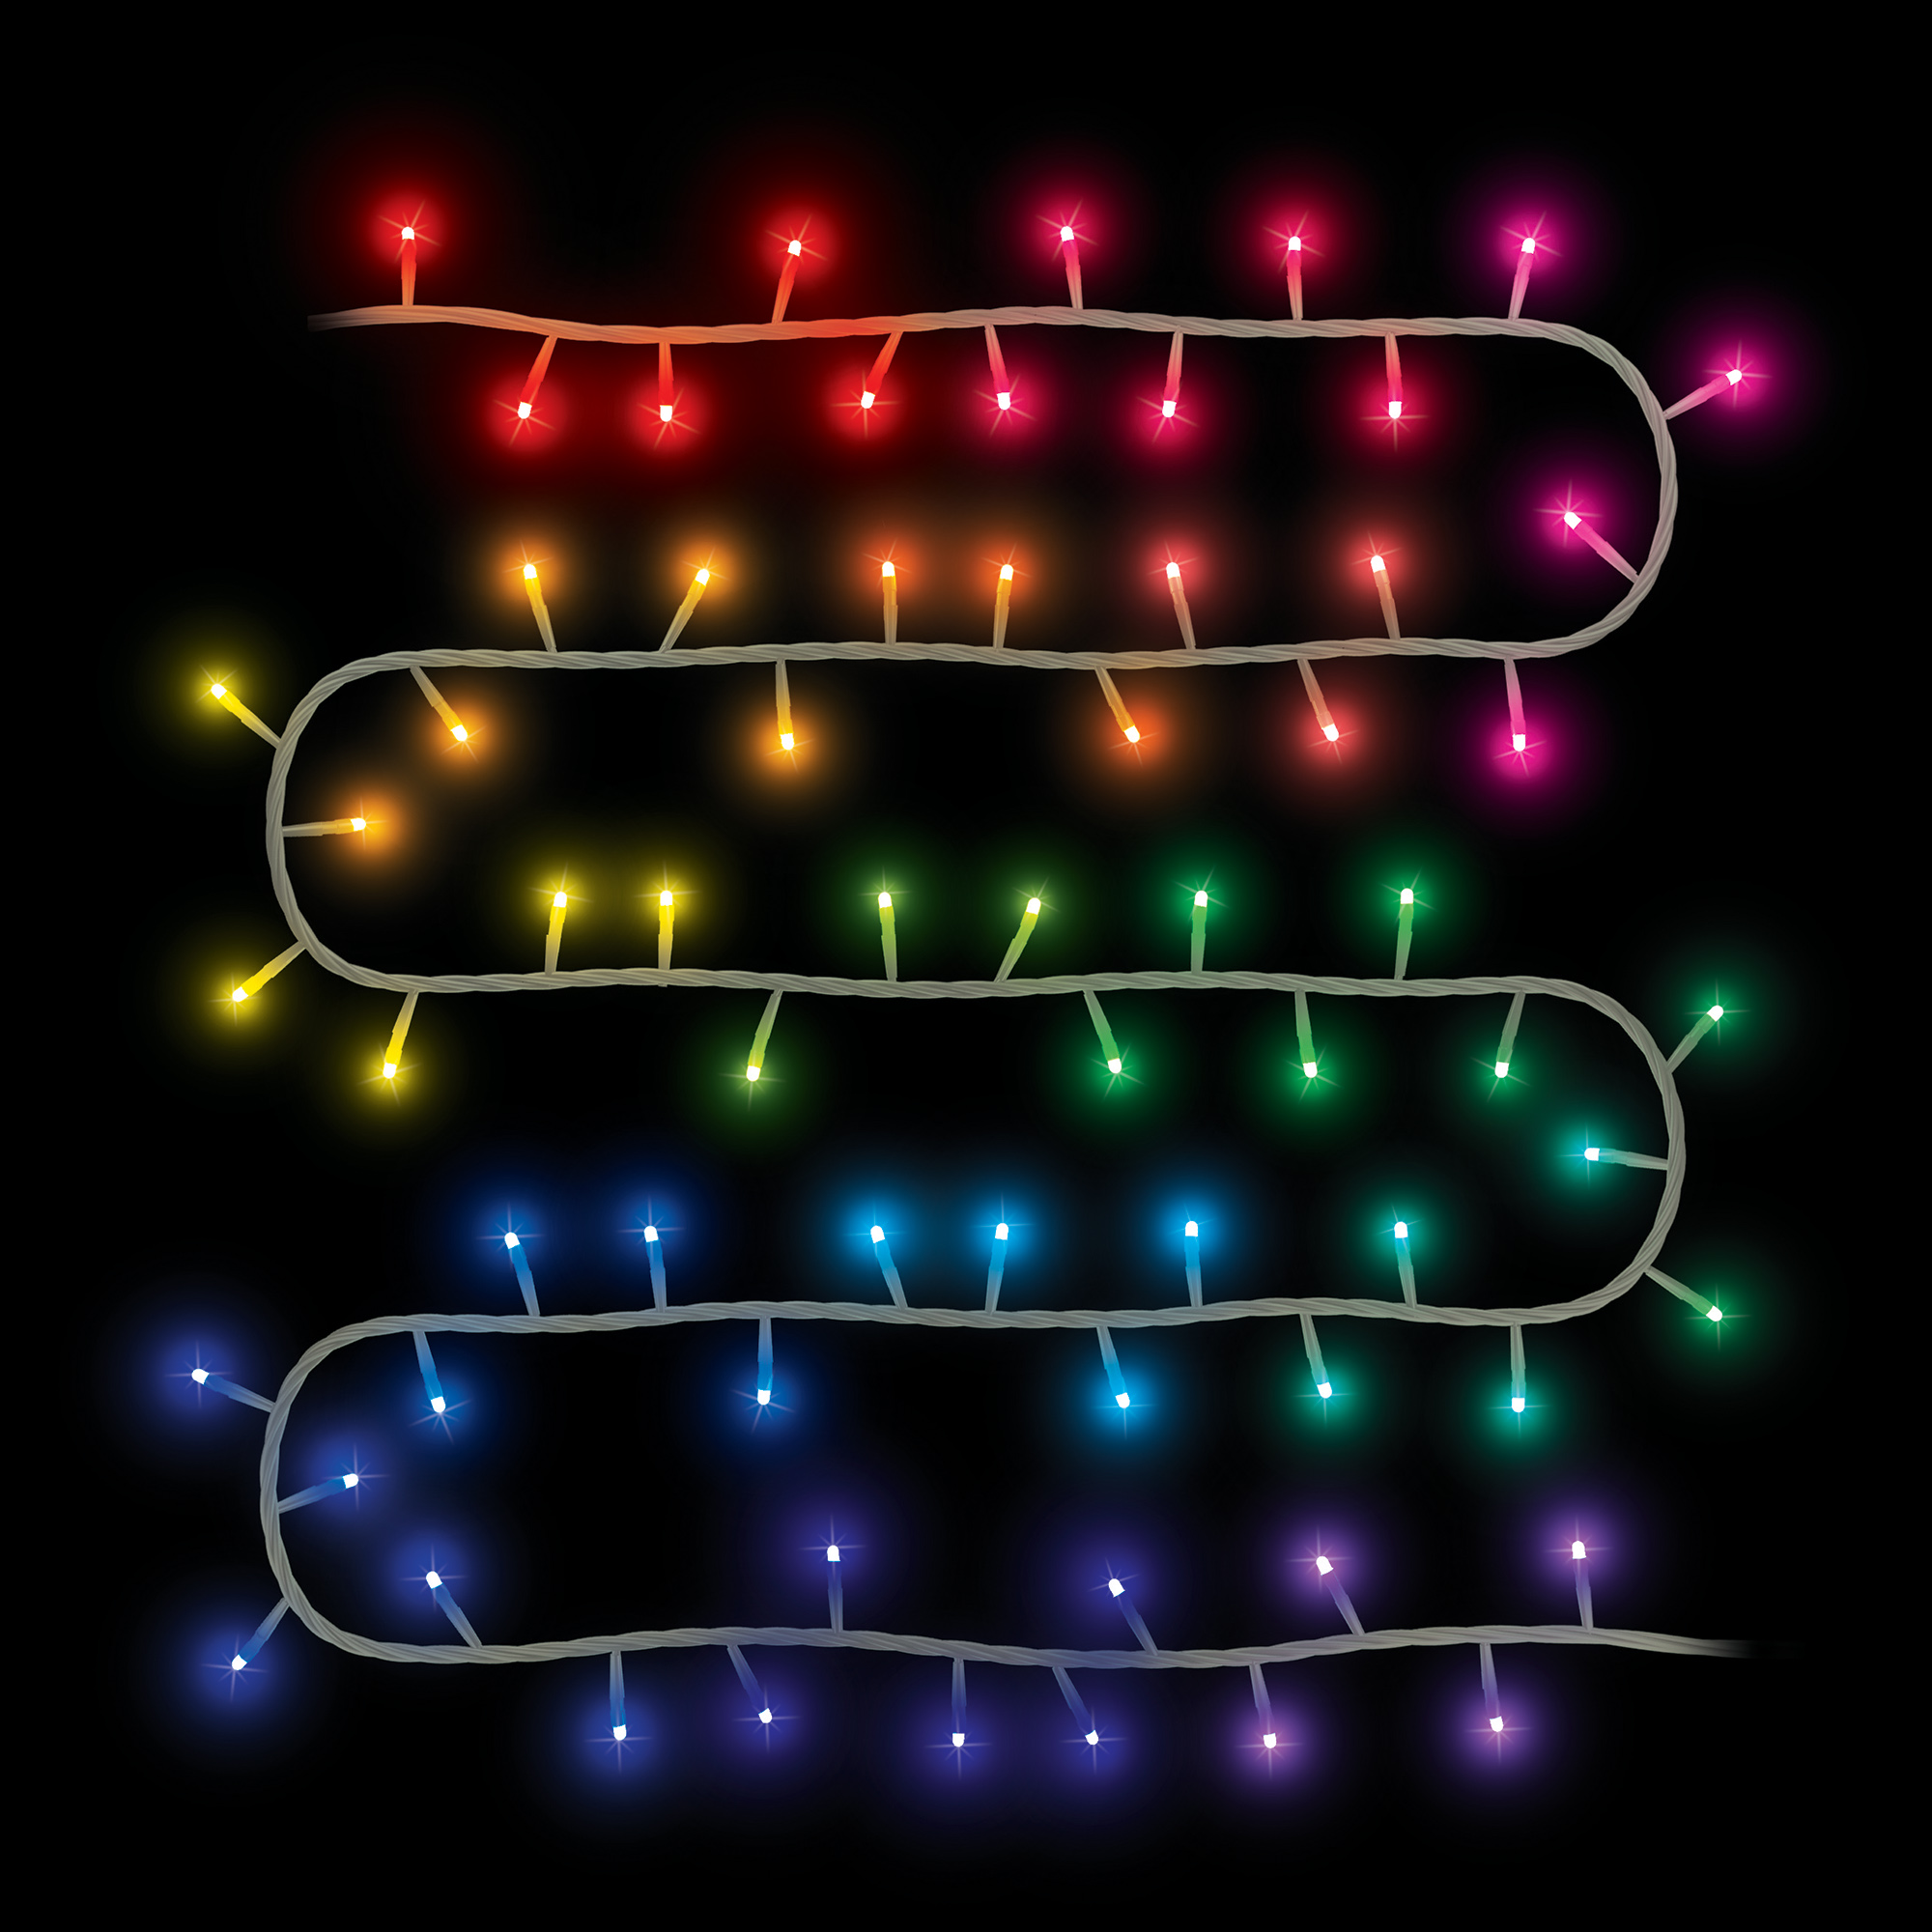 Twinkly Multi-color RGB LED String Lights Holiday Lighting, 6.5' (6 Count) - image 3 of 4